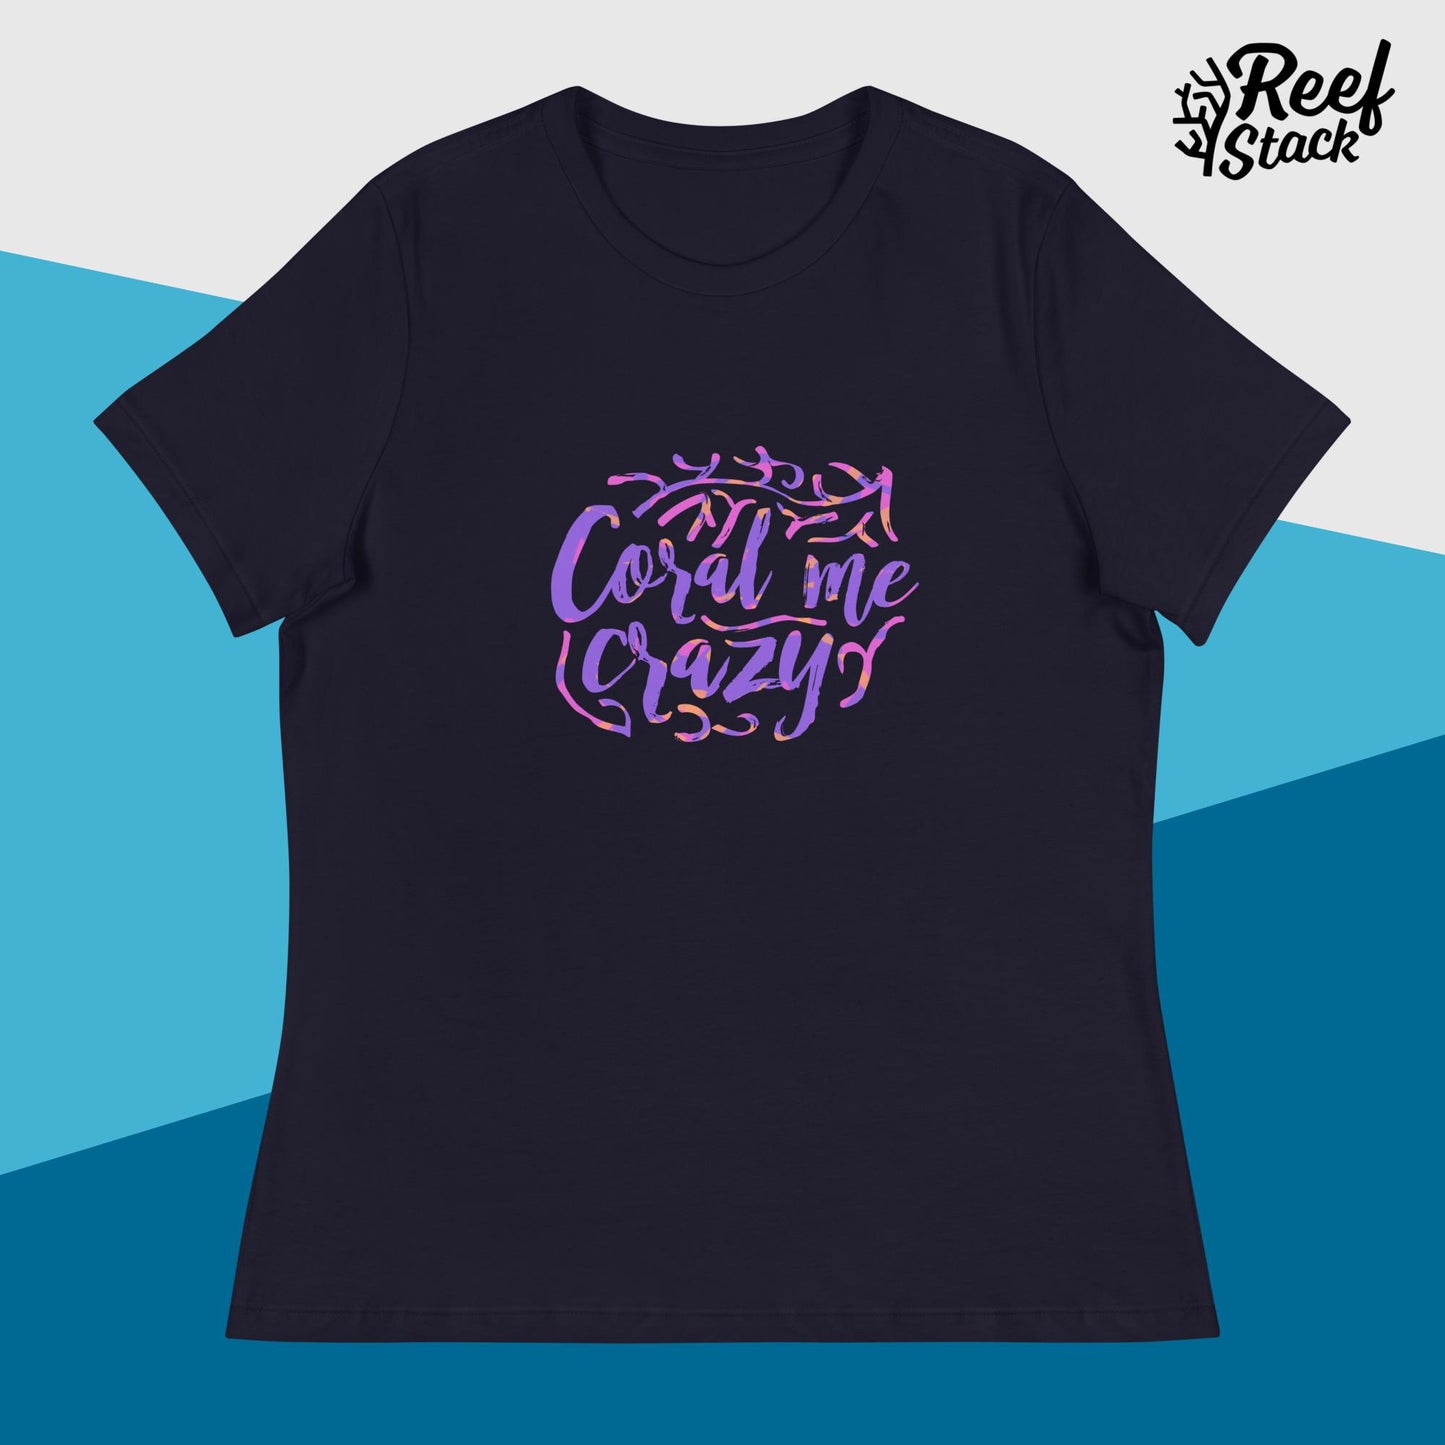 Coral Me Crazy - Women's Relaxed T-Shirt